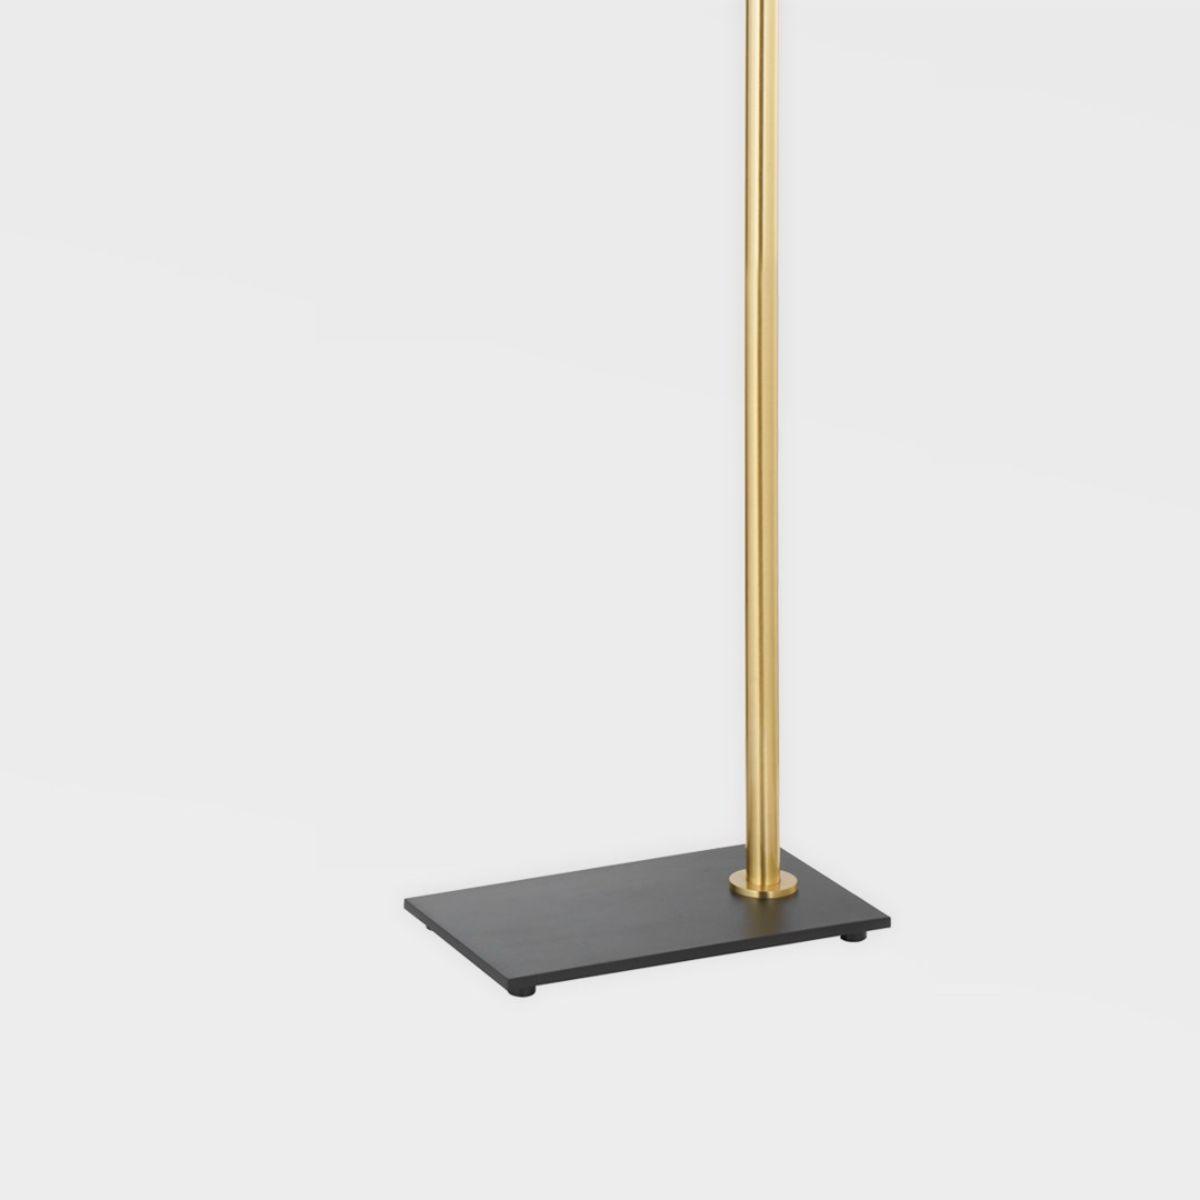 Lauren Floor Lamp Textured Black Combo and Aged Brass with Rattan Finish